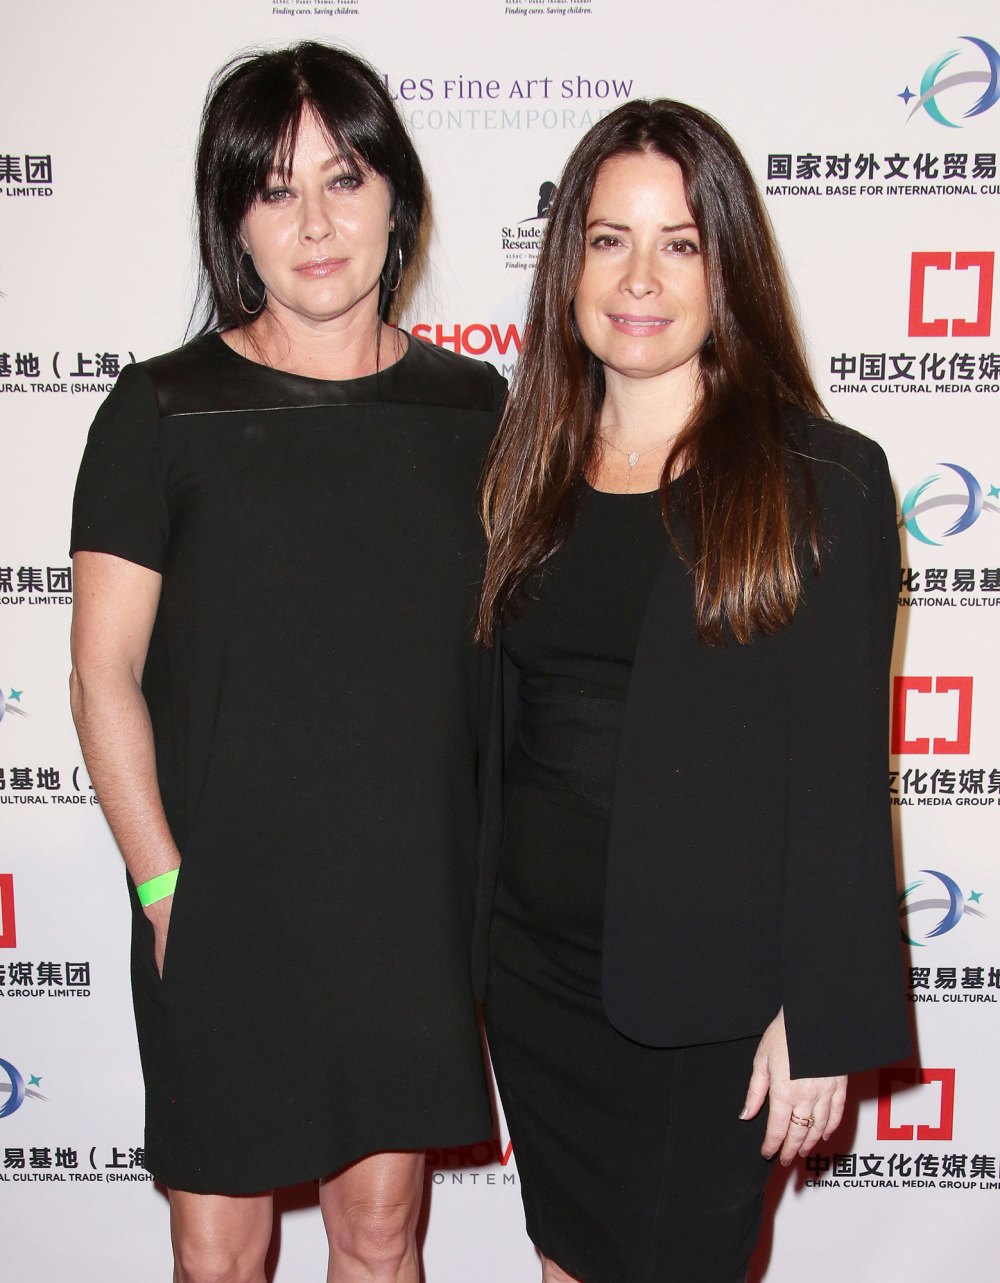 Shannen Doherty Reveals Her Cancer Has Spread: I’m Worried About My Future